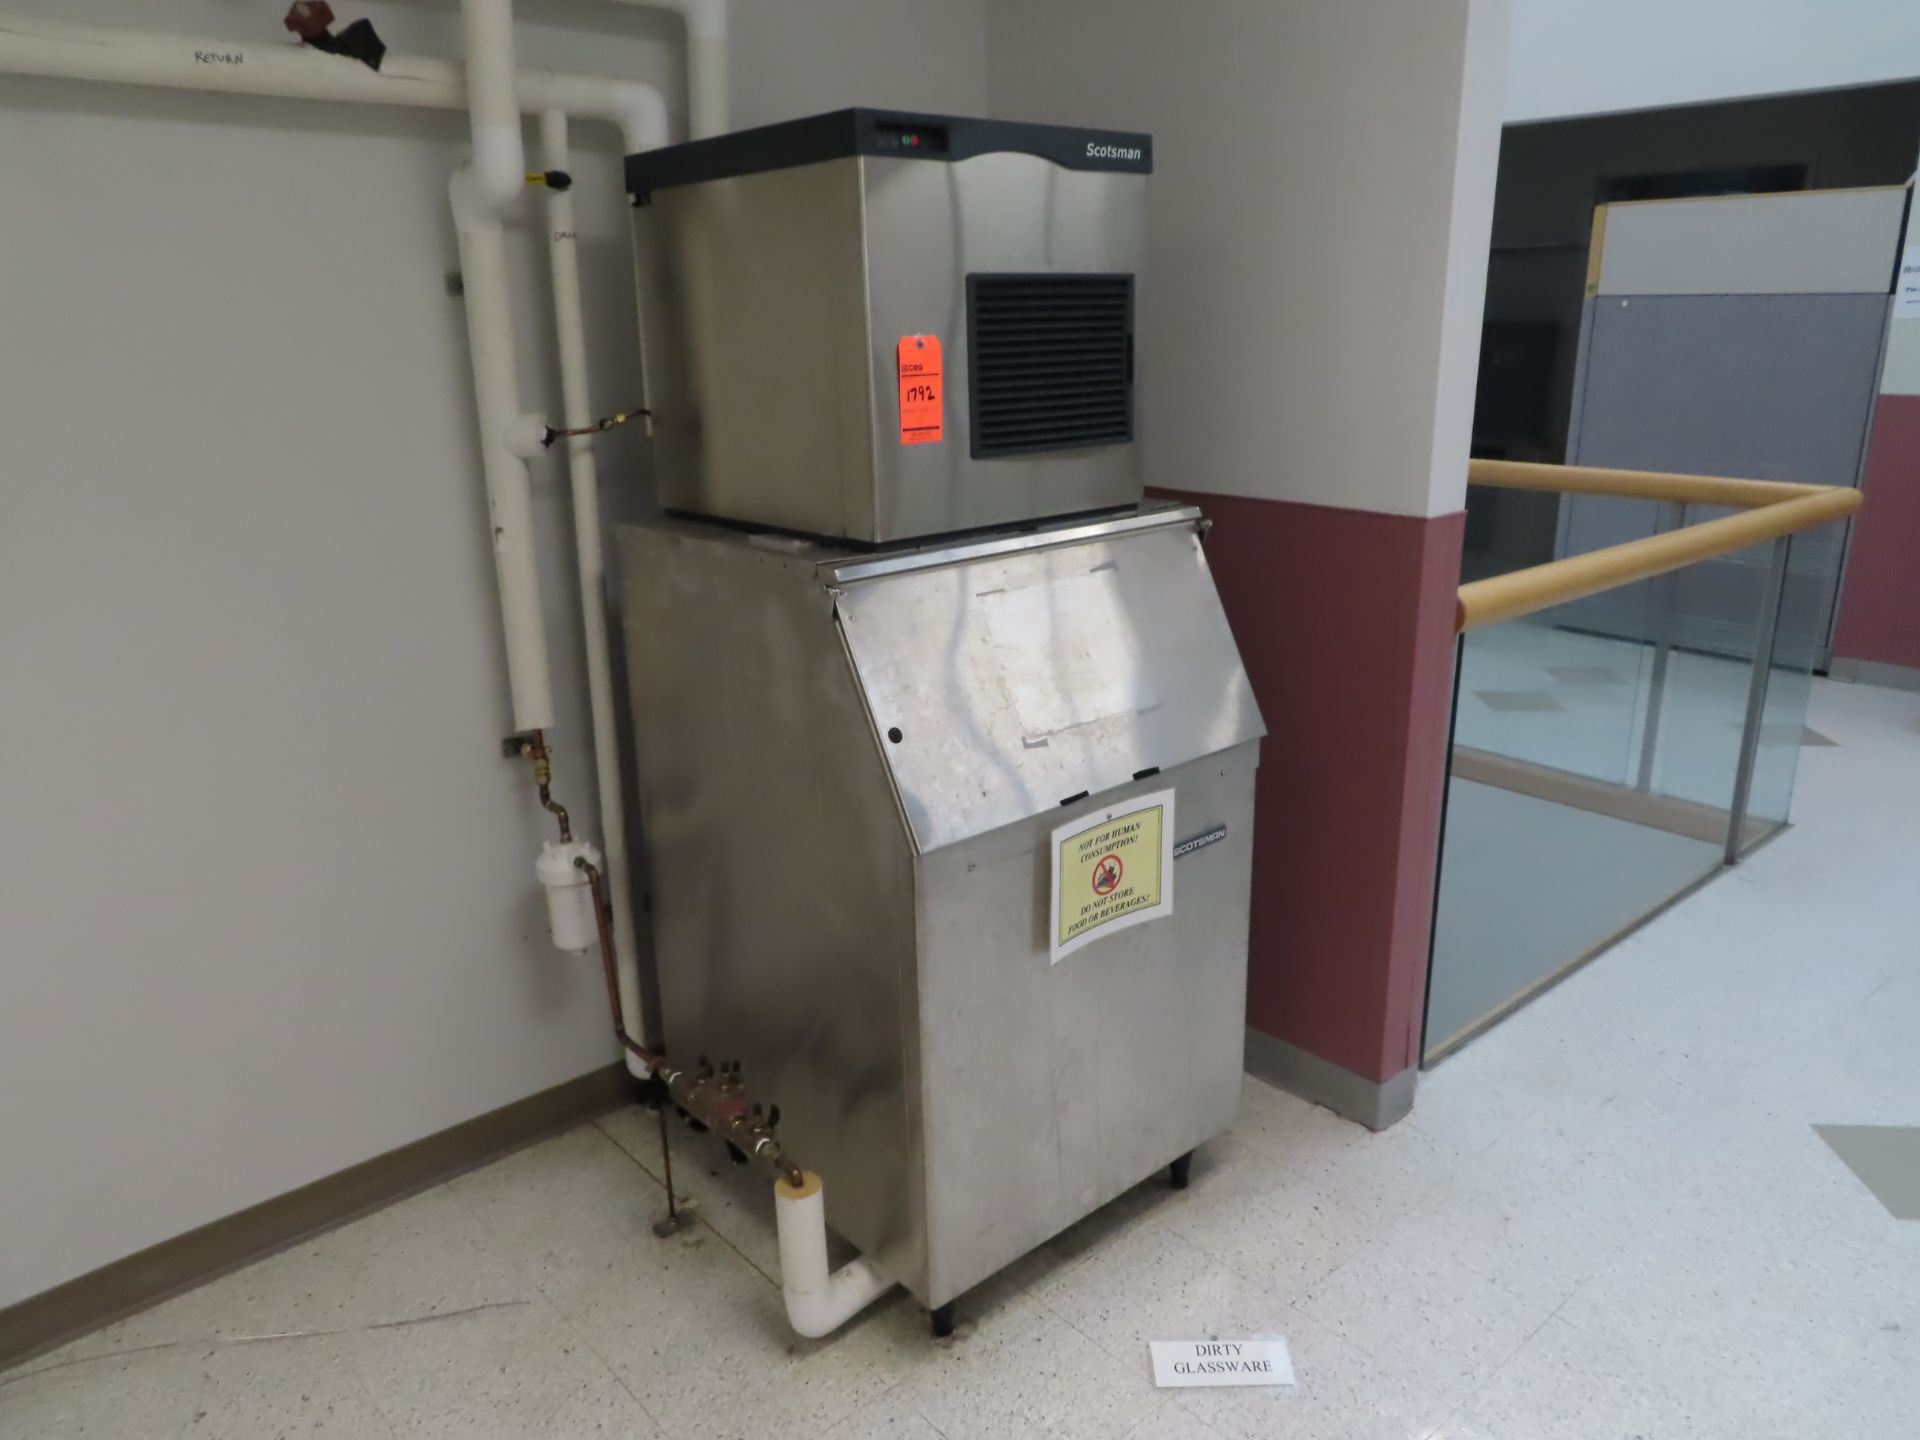 Scotsman F0822A-1A ice maker, s/n 10111320010499, self contained, location in hallway next to lot